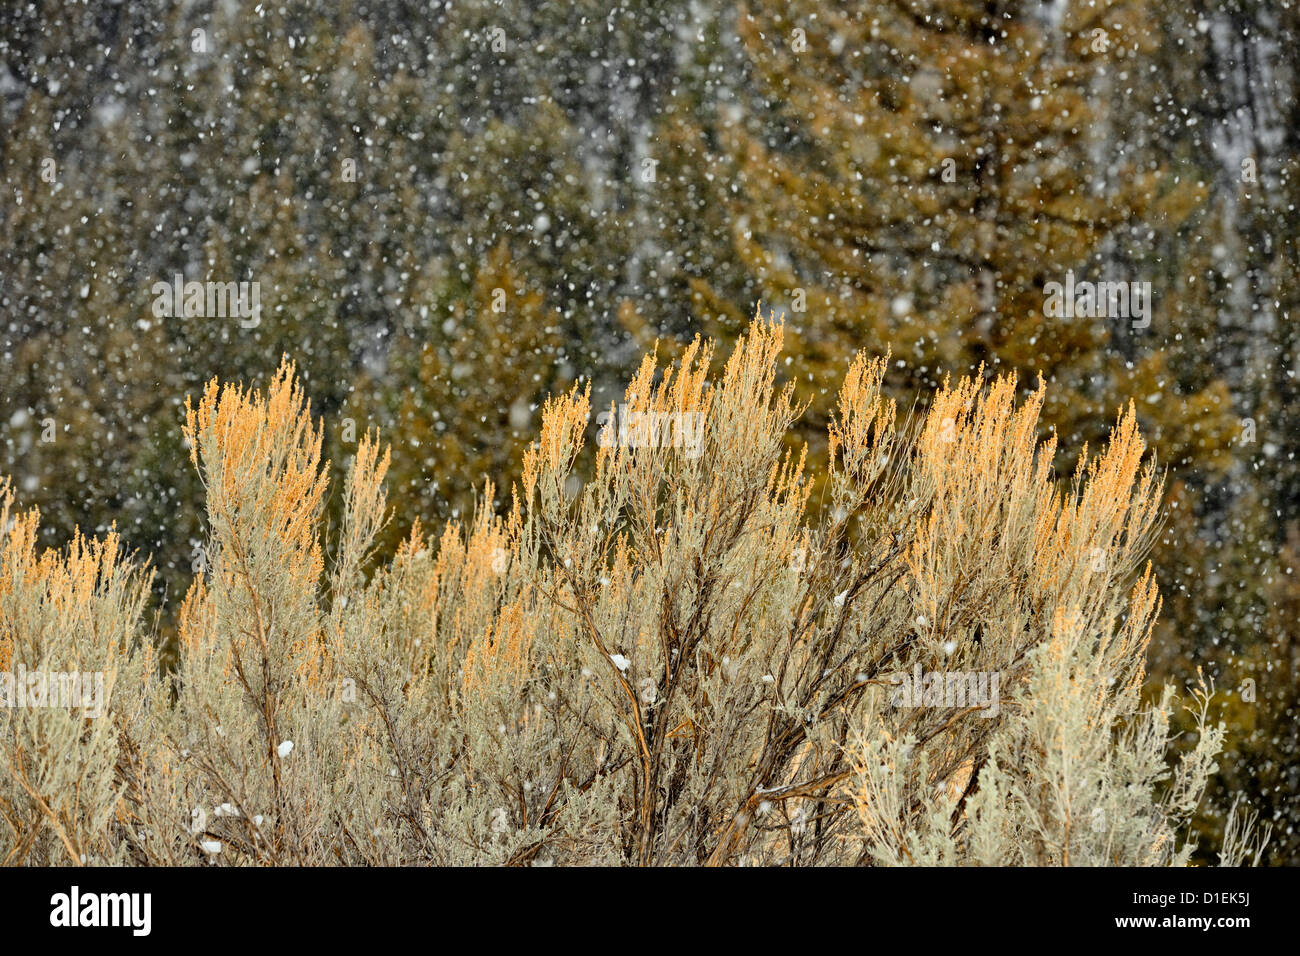 Falling snow, pine trees and sage brush in the Lamar Valley, Yellowstone National Park, Wyoming, USA Stock Photo